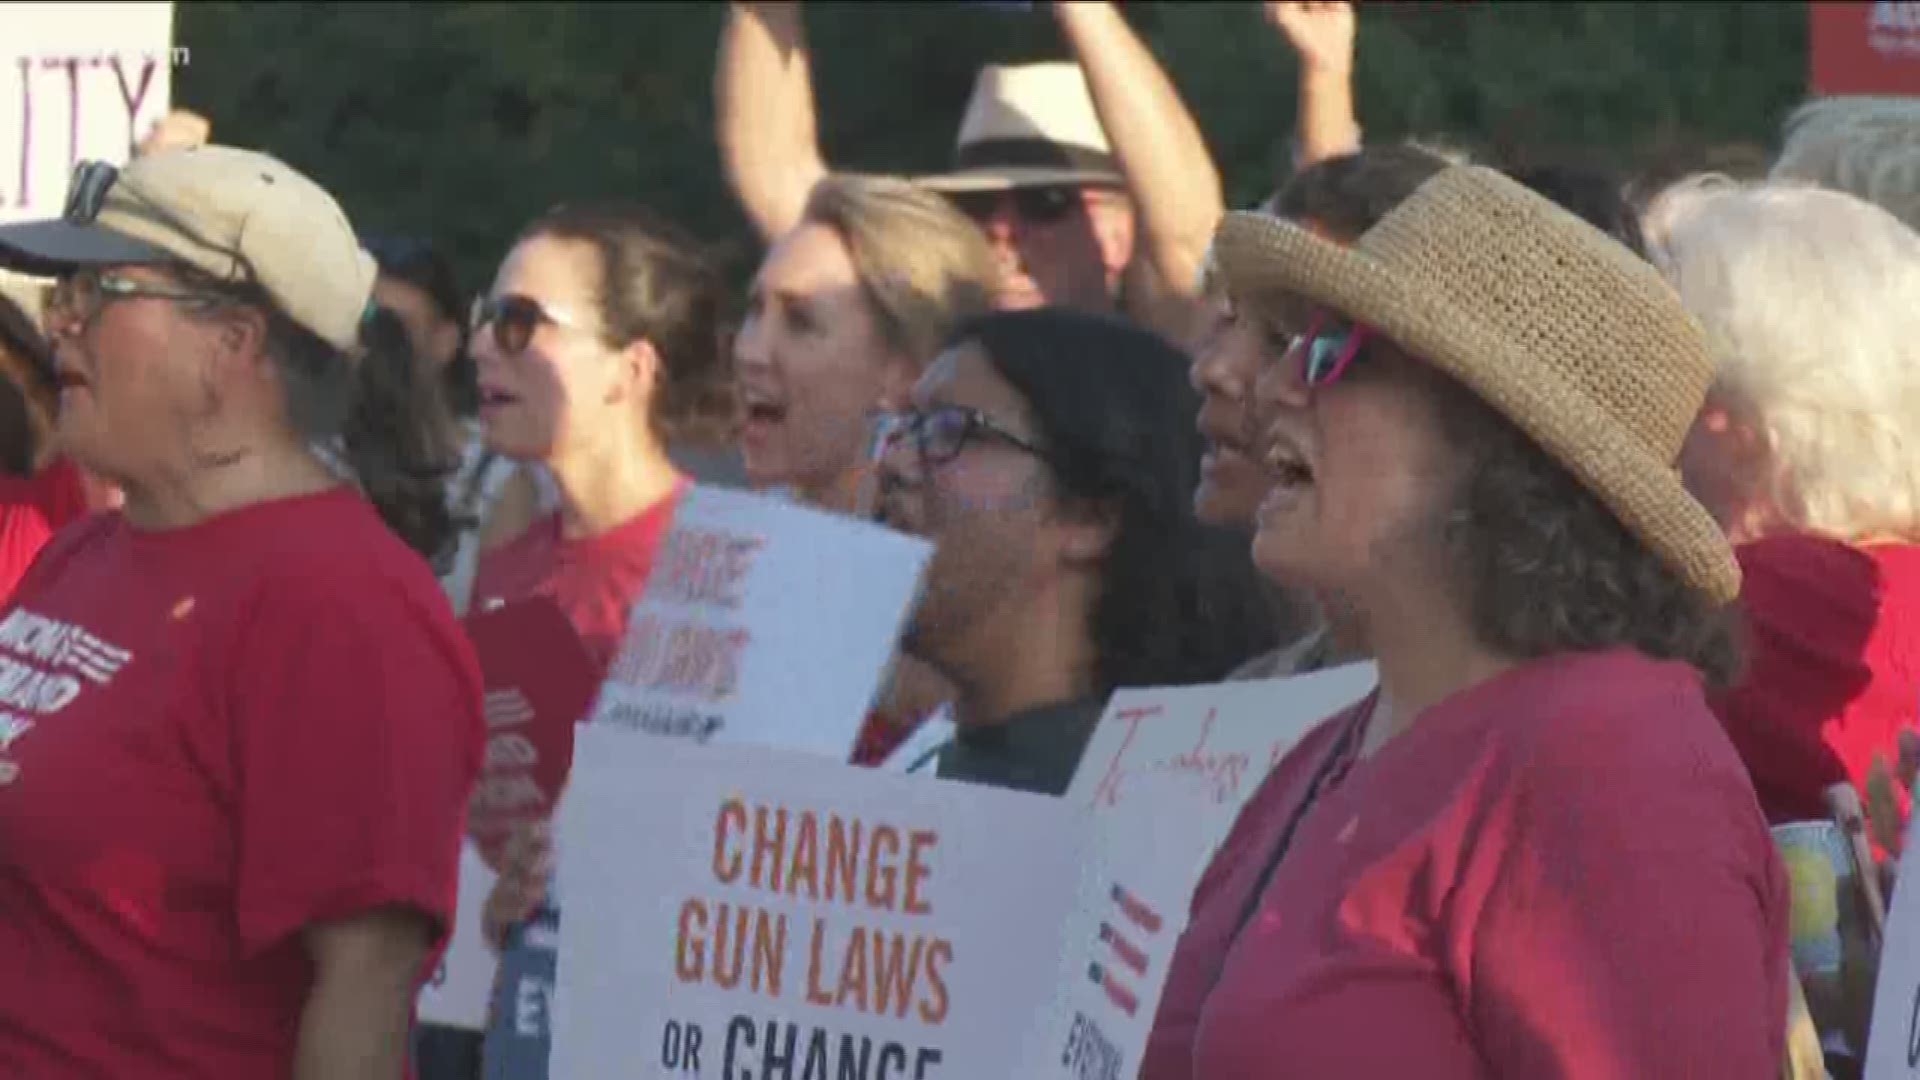 Hundreds of people on Saturday honored the lives lost to gun violence and also called for gun reform.